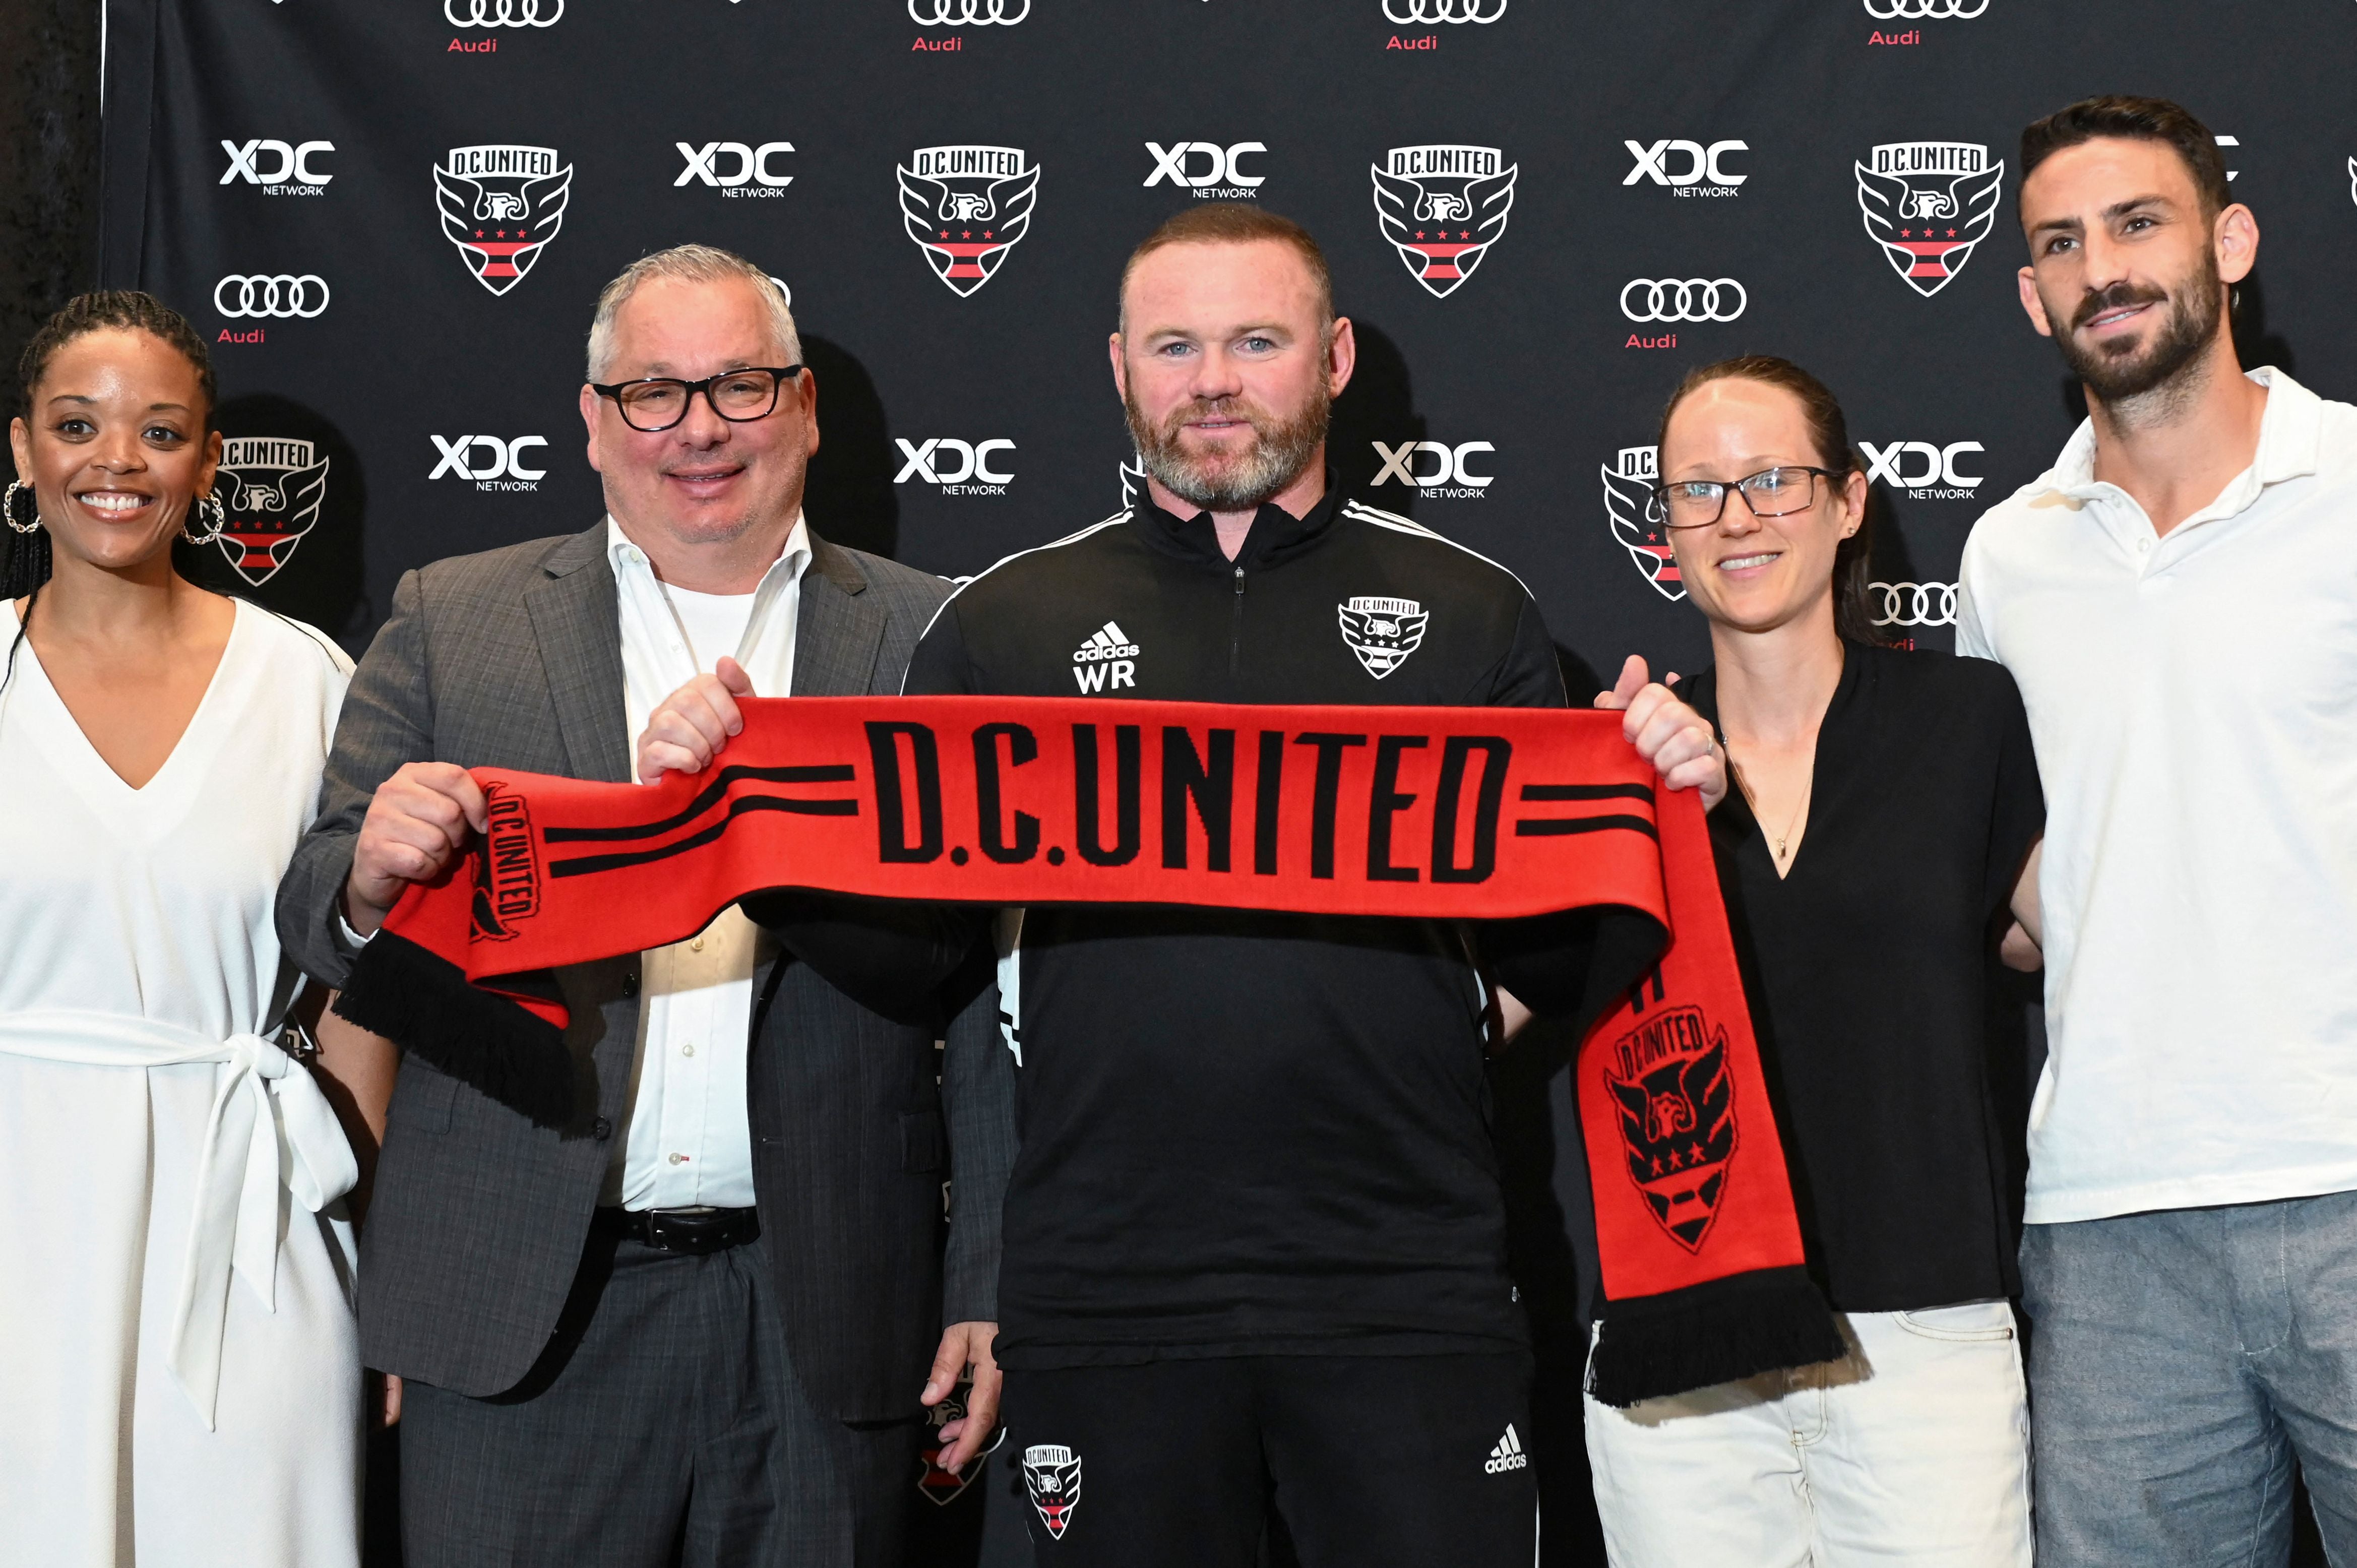 D.C United have been fined for breaching MLS’s diversity hiring policy when appointing Rooney as coach